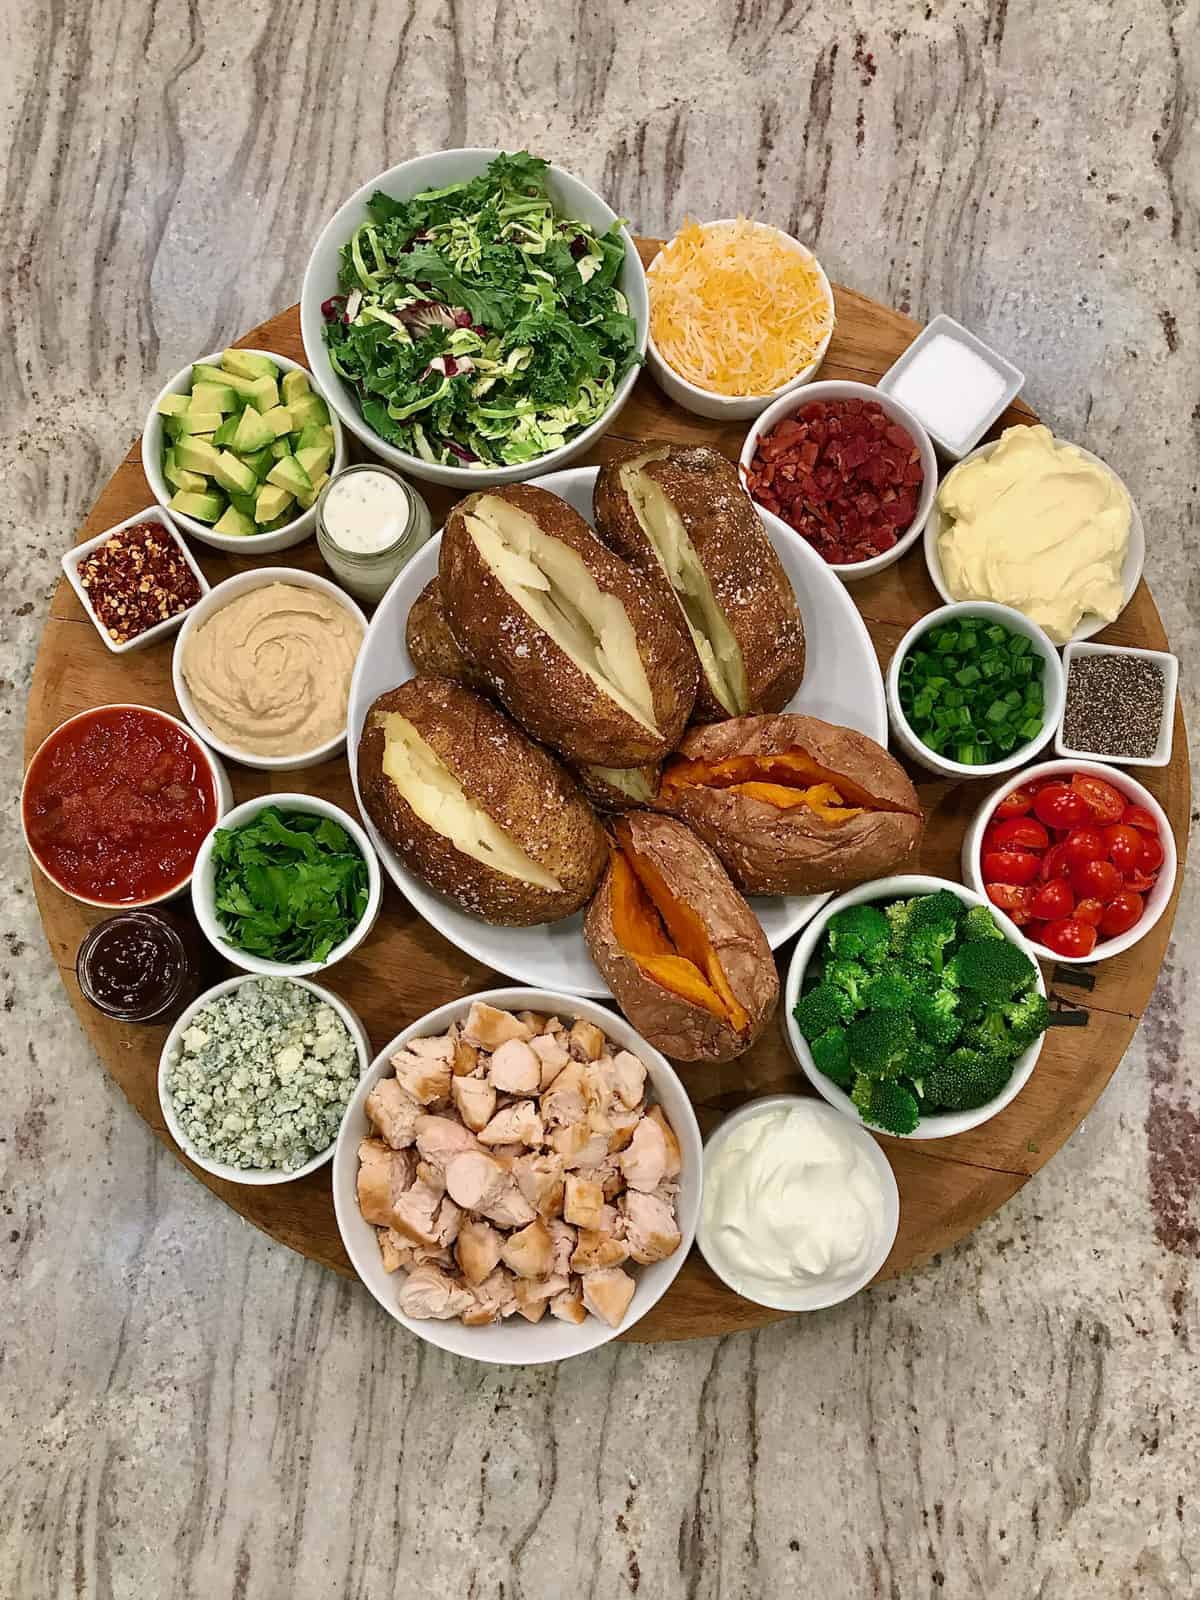 Build Your Own Baked Potato Board by The BakerMama